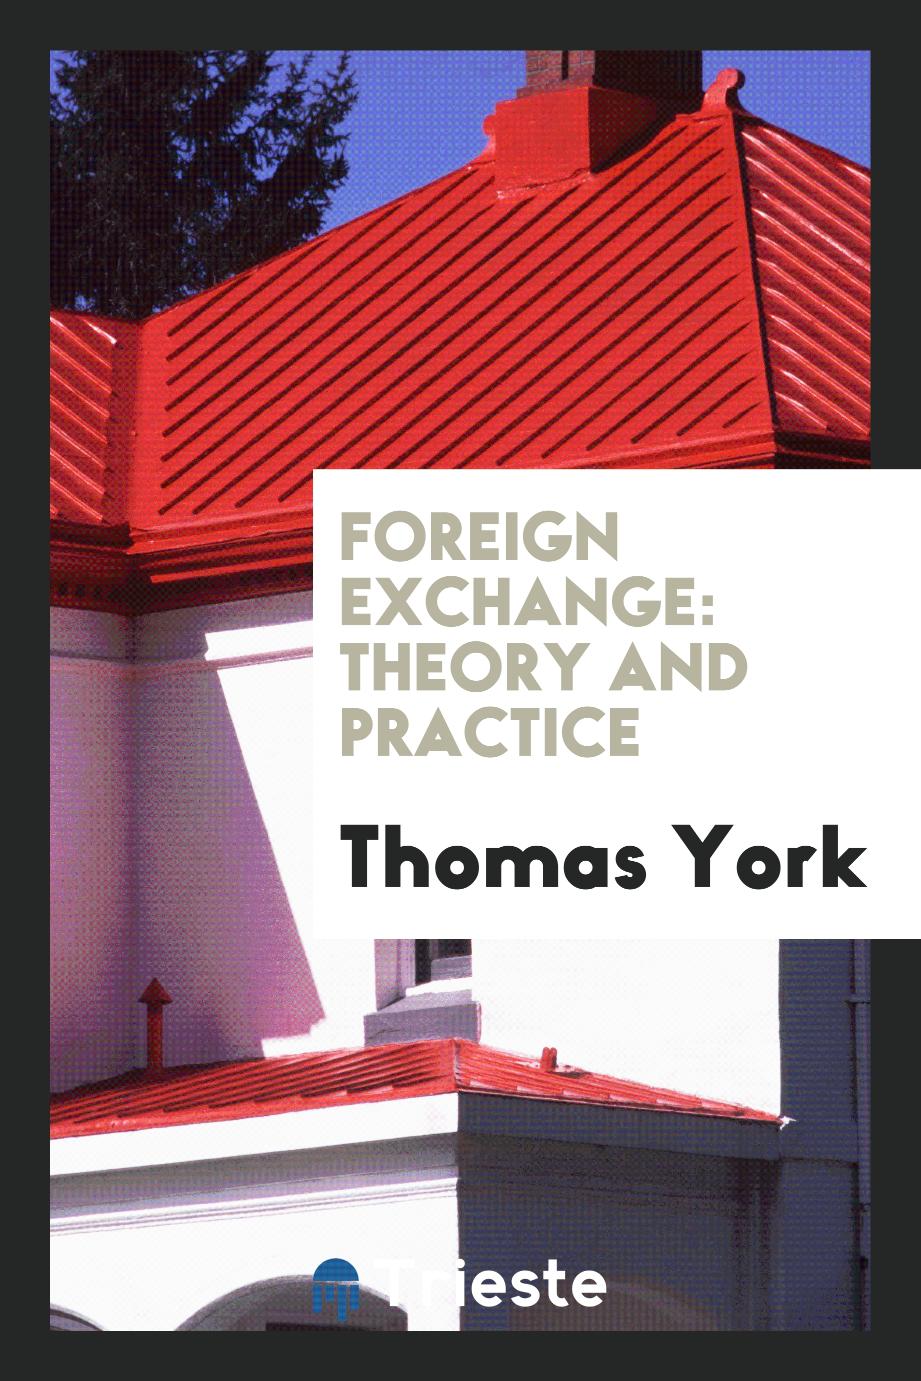 Foreign exchange: theory and practice